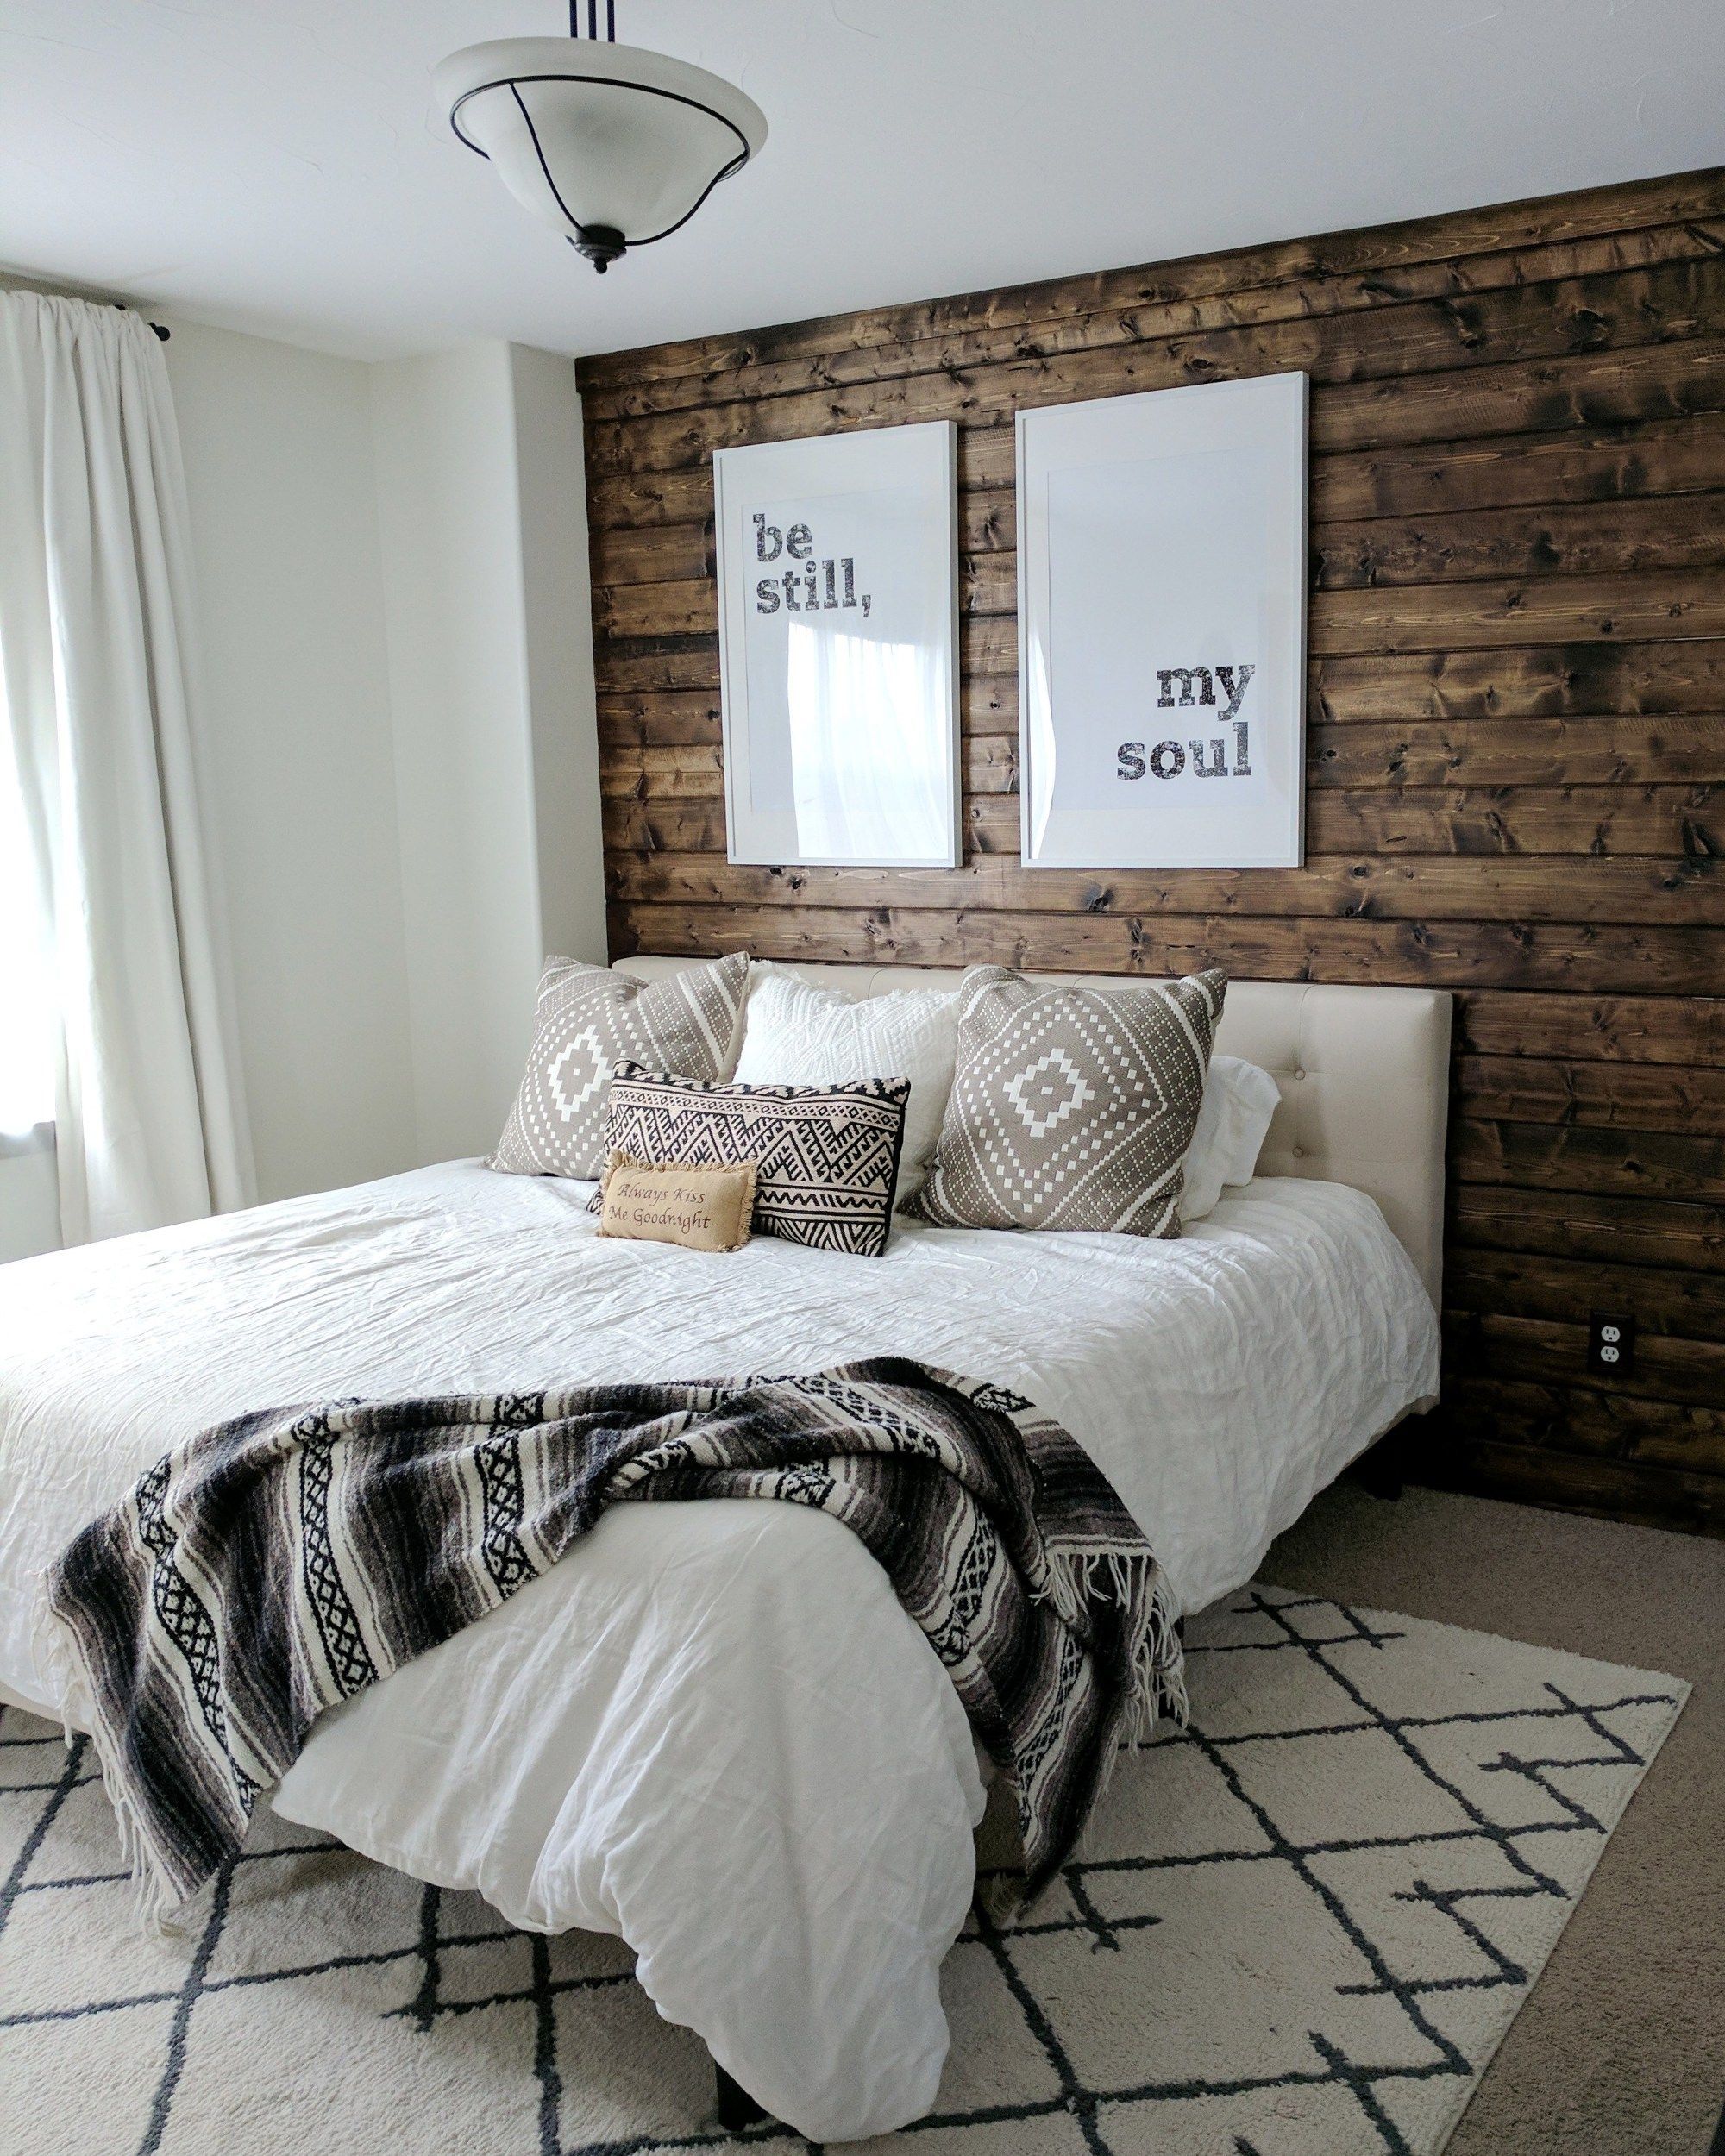 Budget Friendly Beauty: Cost Effective DIY Bedroom Accent Wall Projects